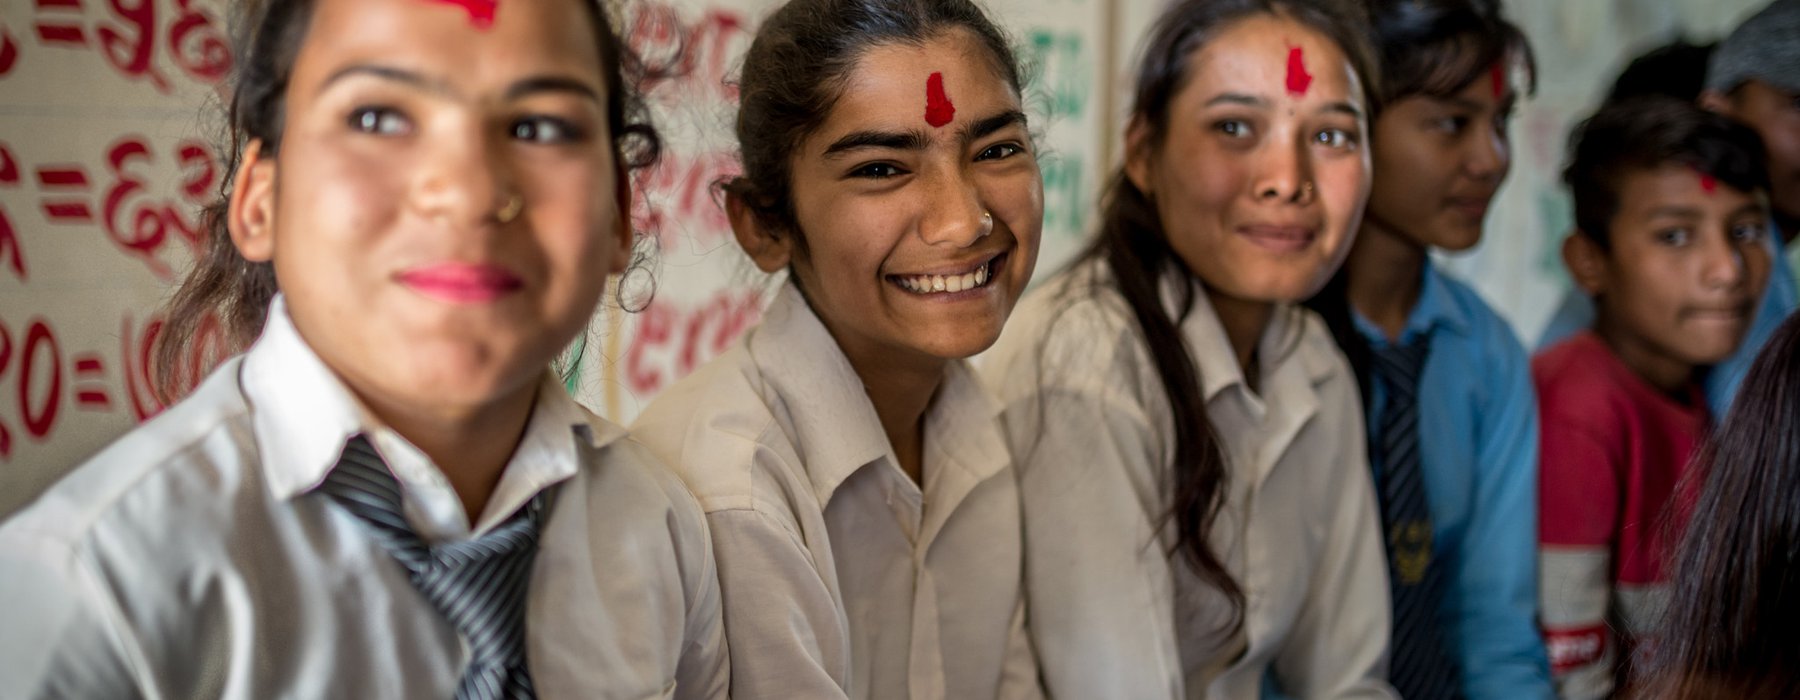 Three girls in a classroom setting smile at the camera. They have red powder on their foreheads.